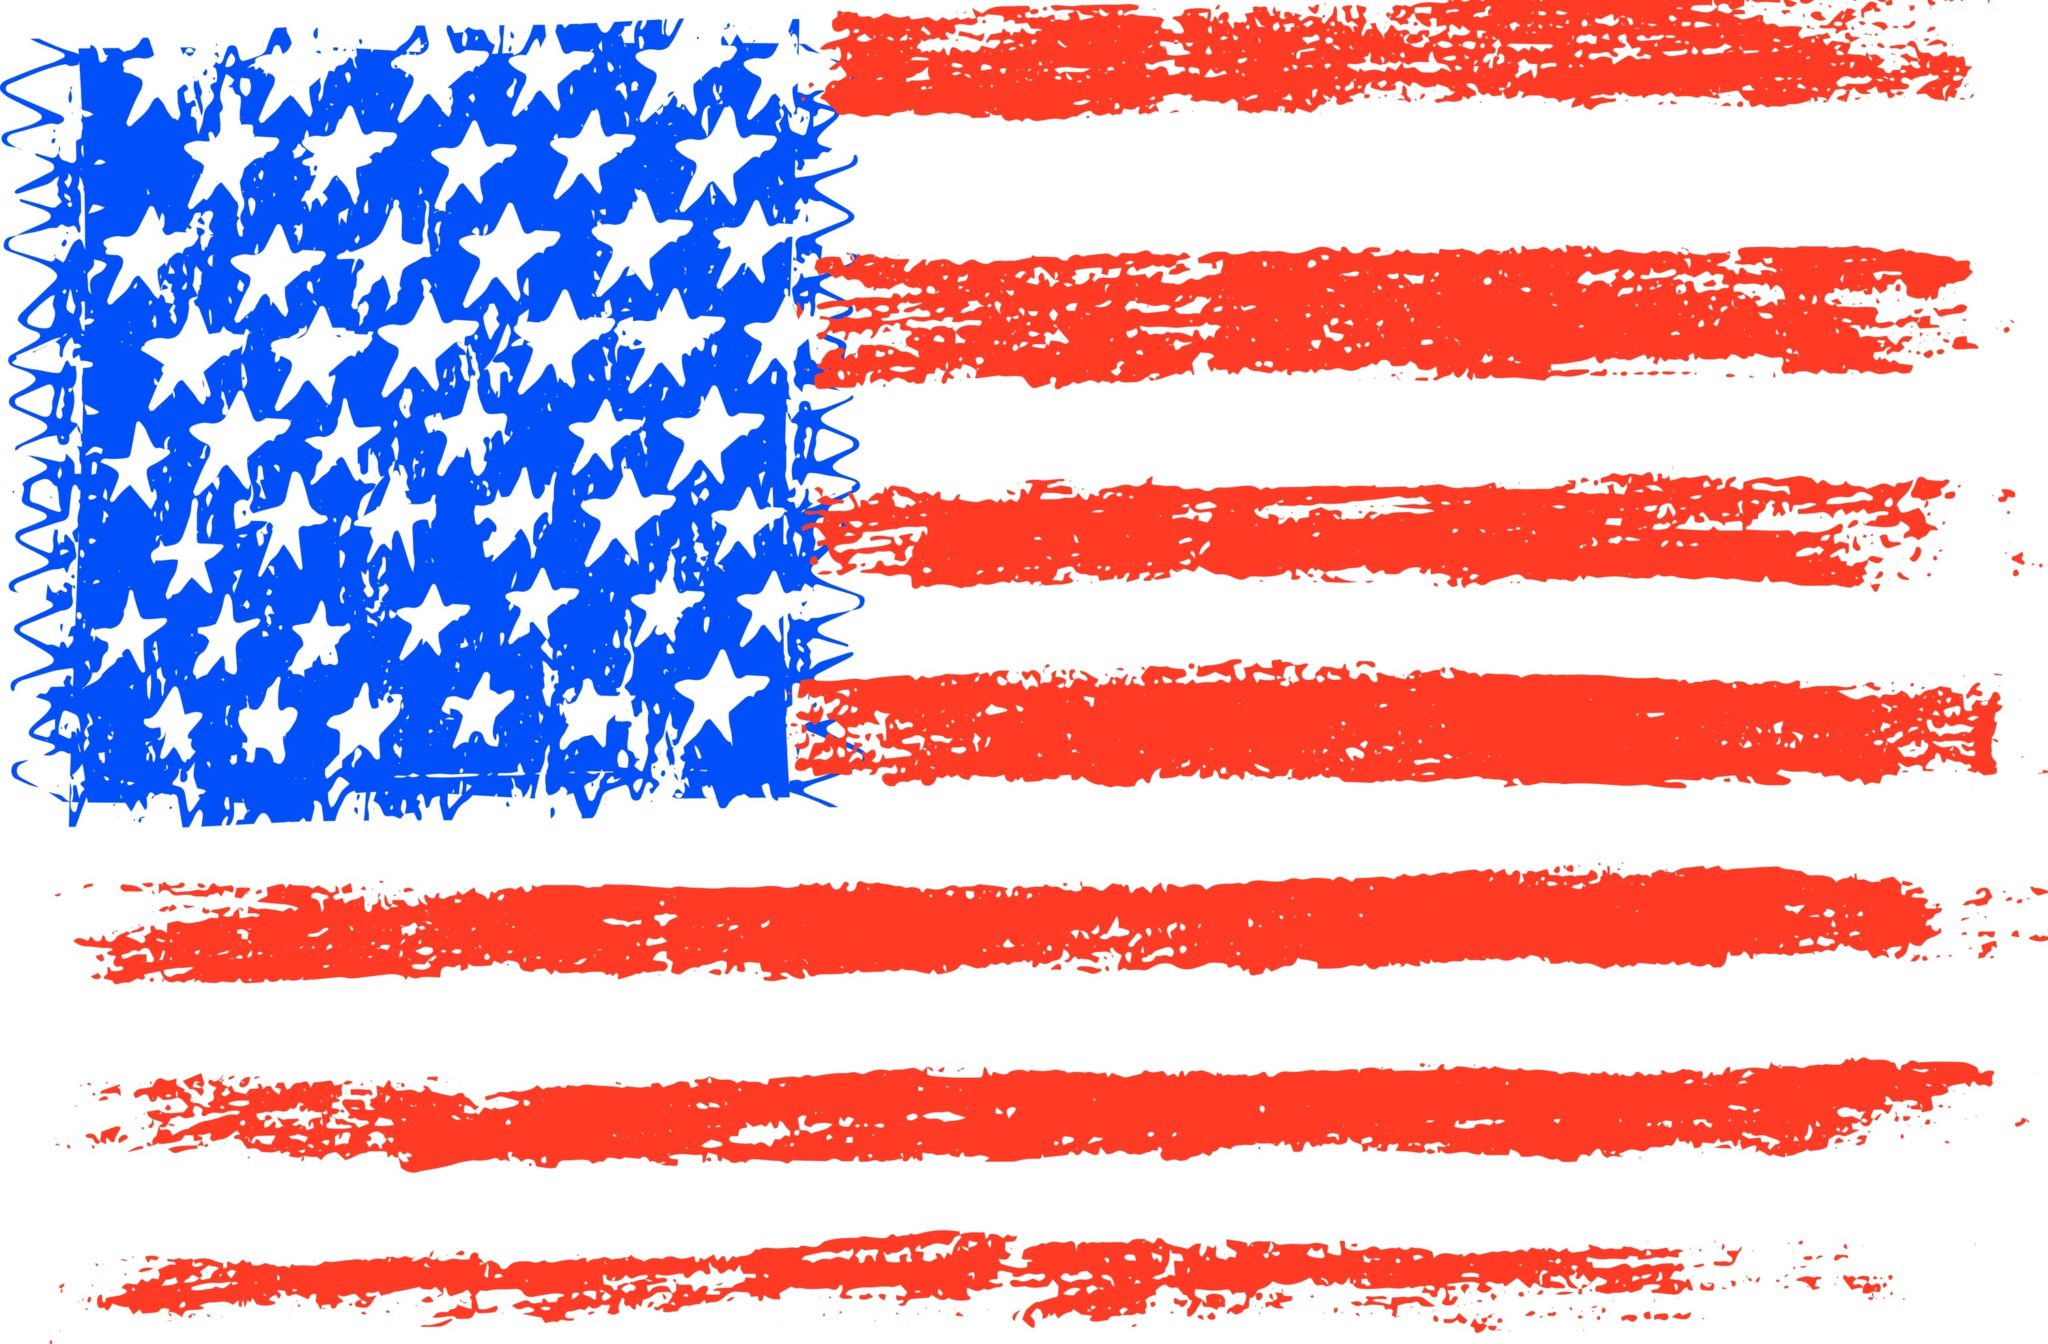 Image of a child-like crayon drawing of the American Flag